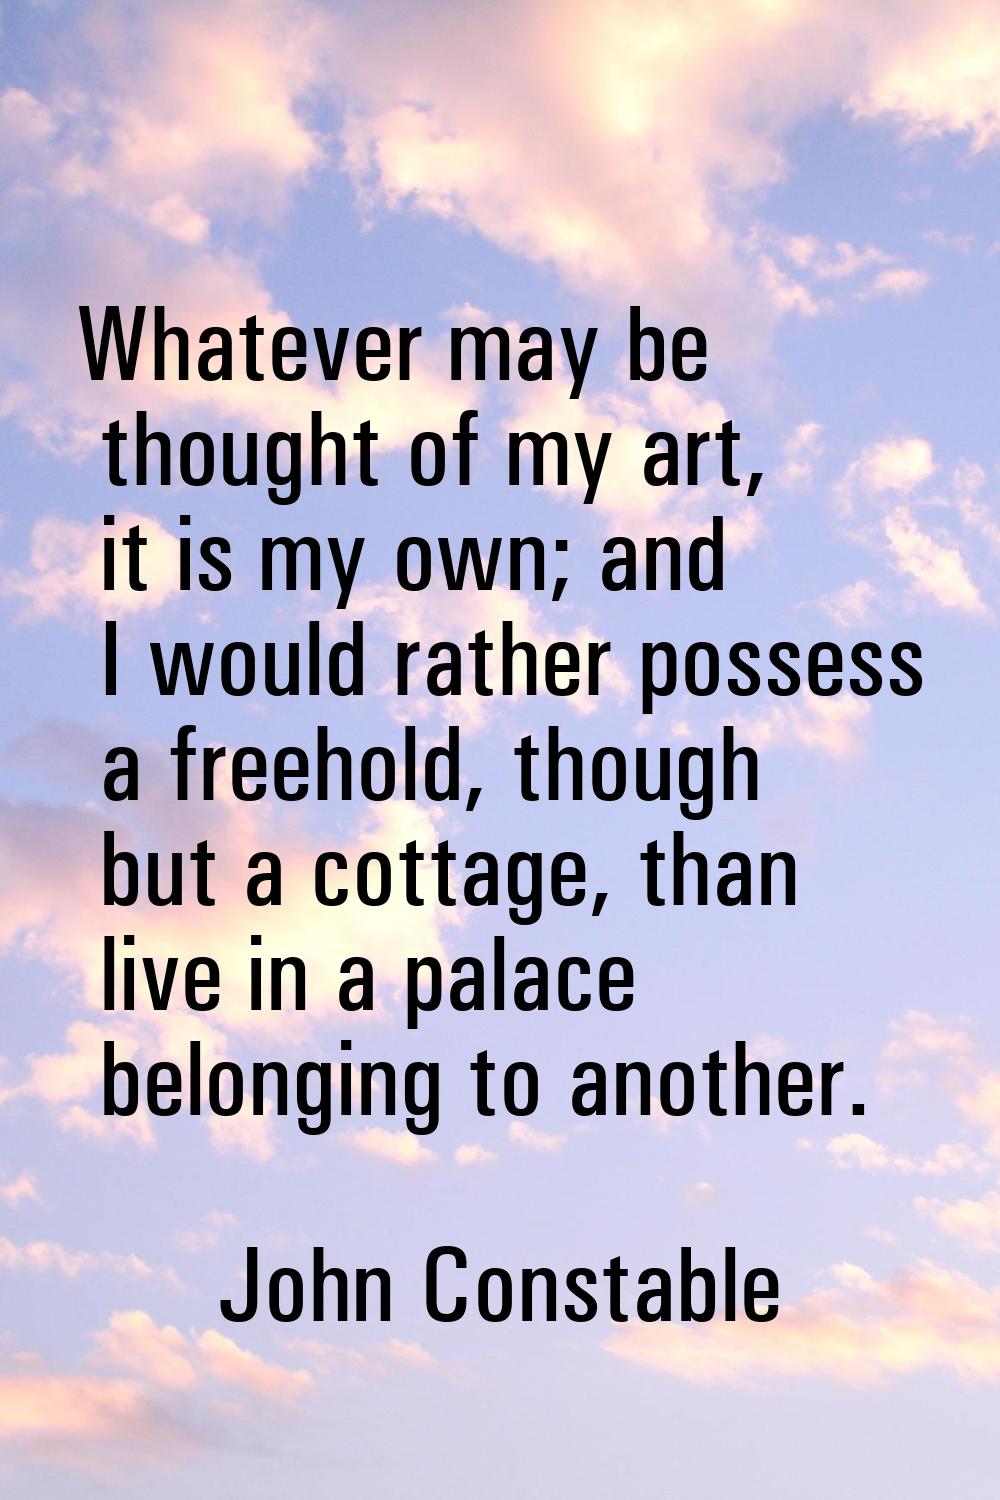 Whatever may be thought of my art, it is my own; and I would rather possess a freehold, though but 